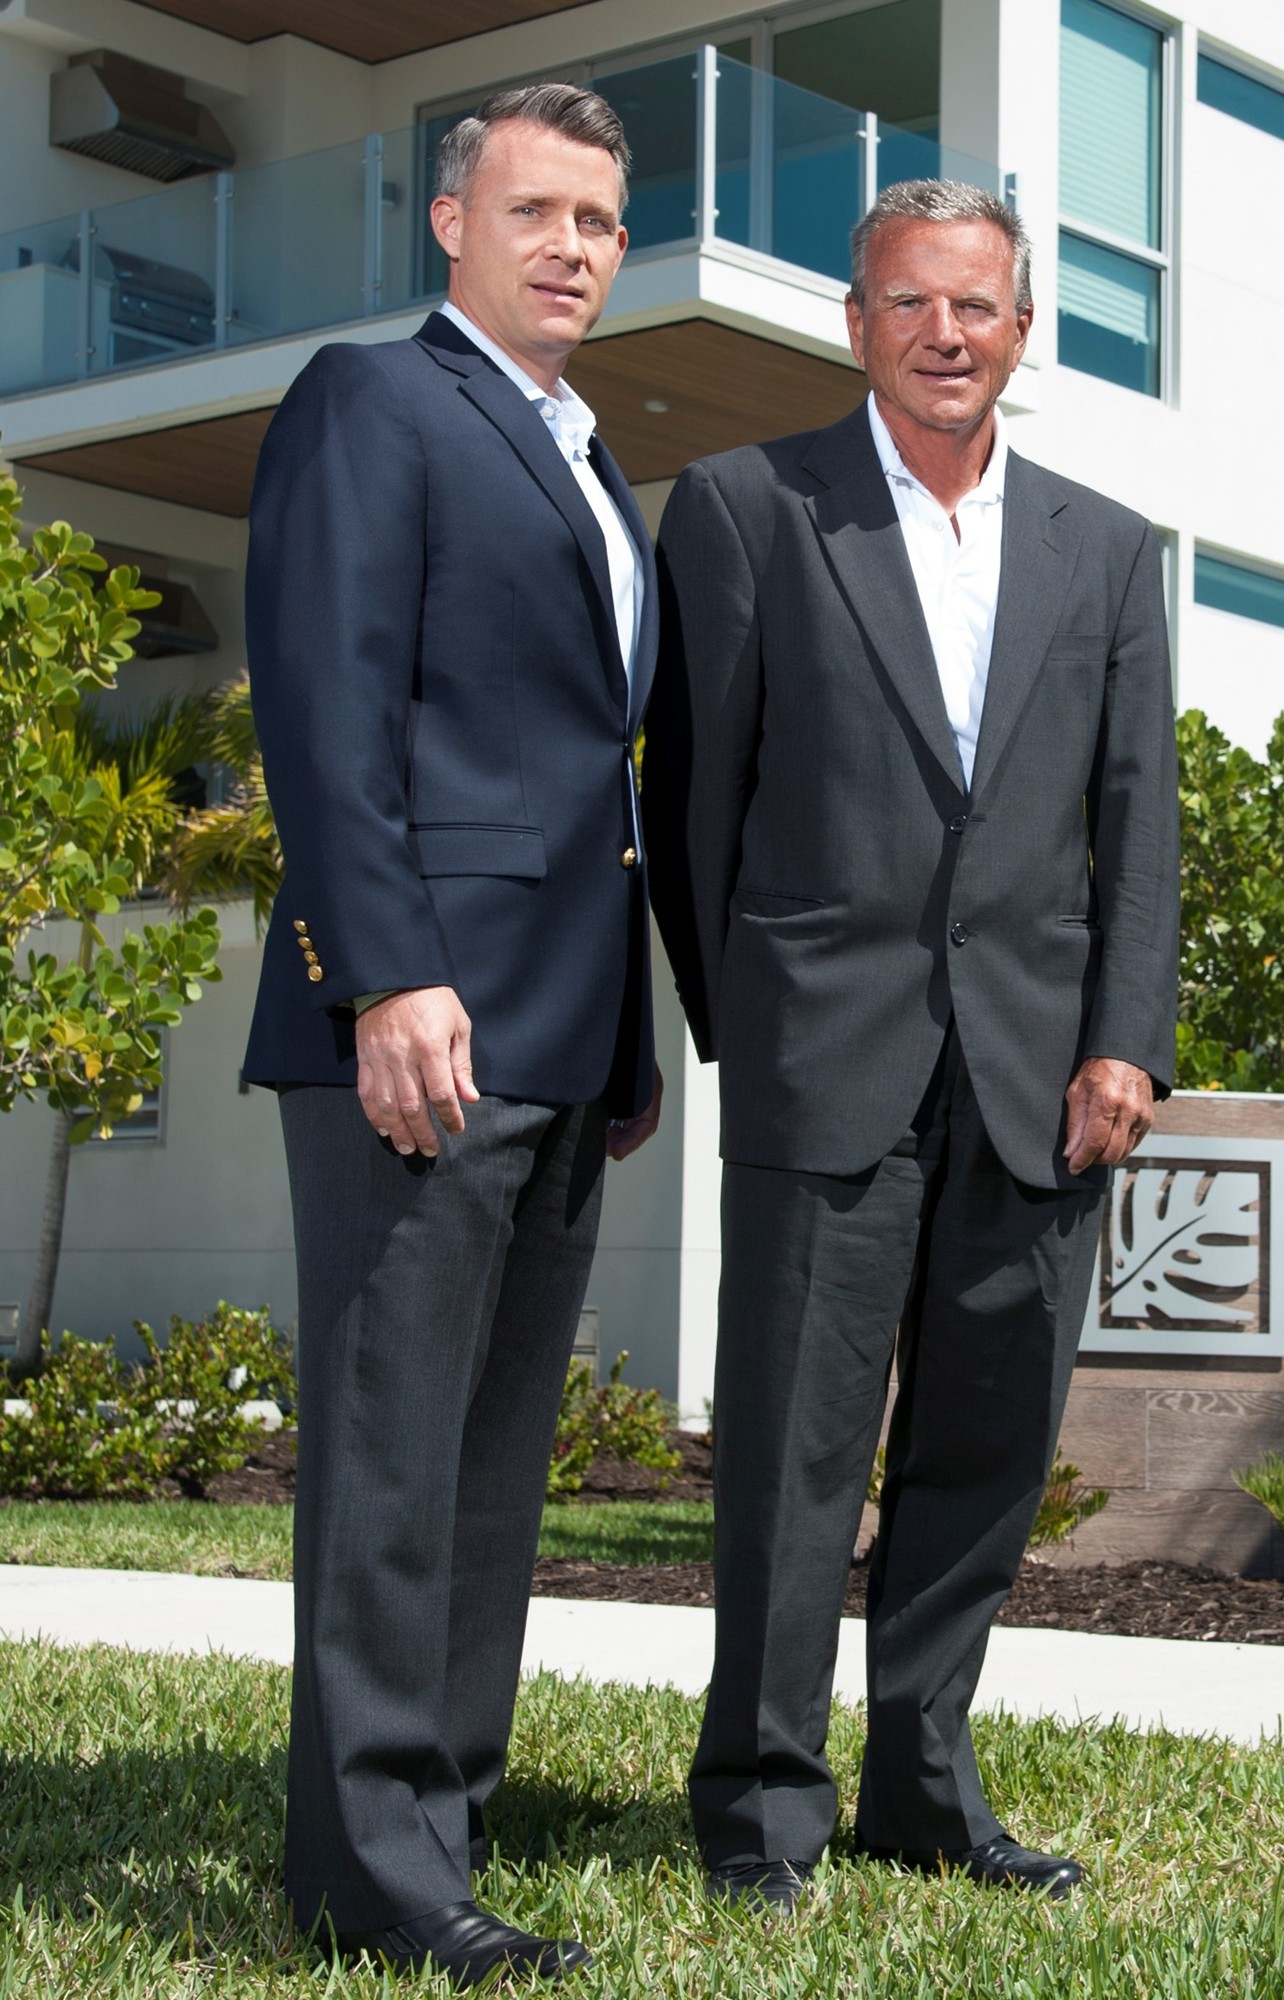 Patick DiPinto and David Hargreaves of Seaward Development are moving forward with two different high-end luxury condominium projects on Gulfstream and Palm avenues.